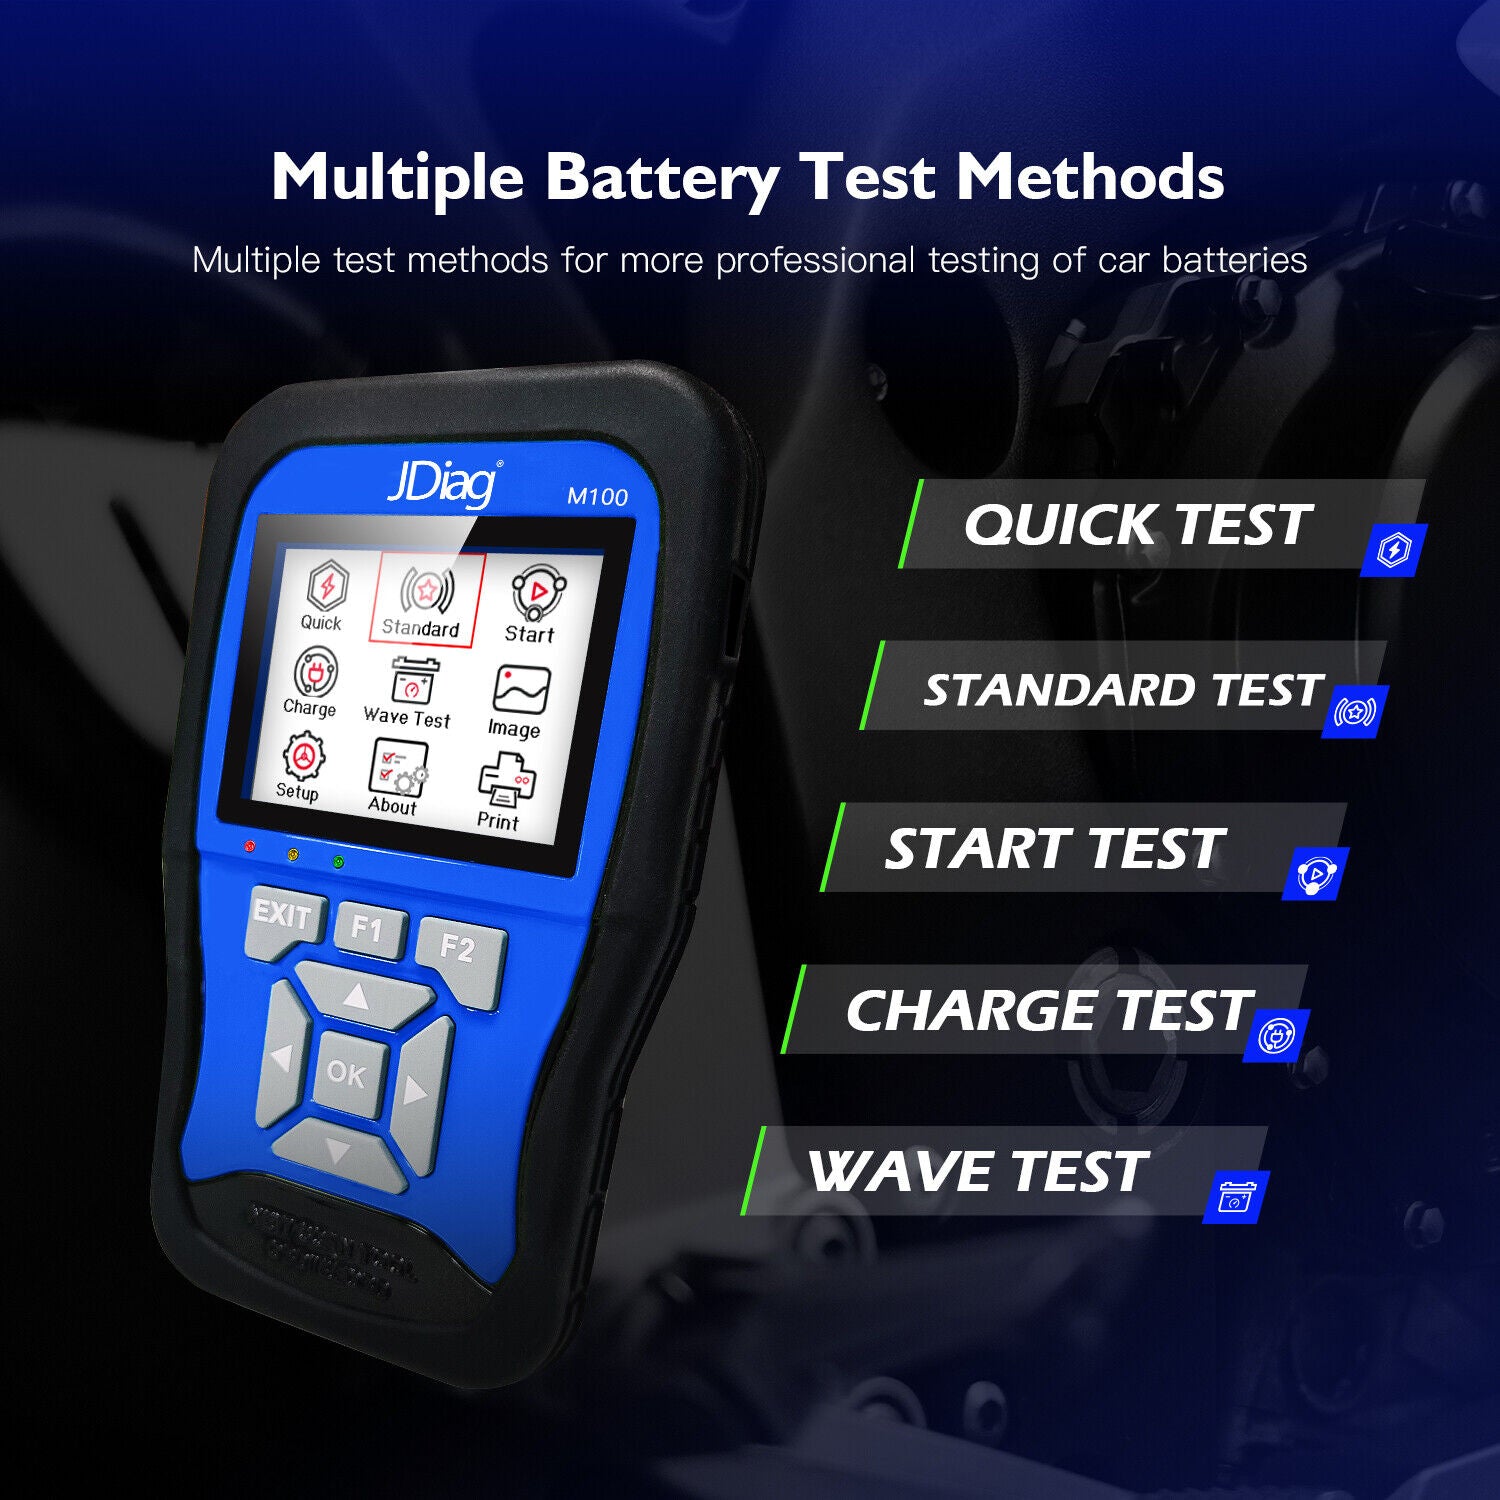 obd 2 scanner tool supports quick tests, basic tests, startup tests, etc.